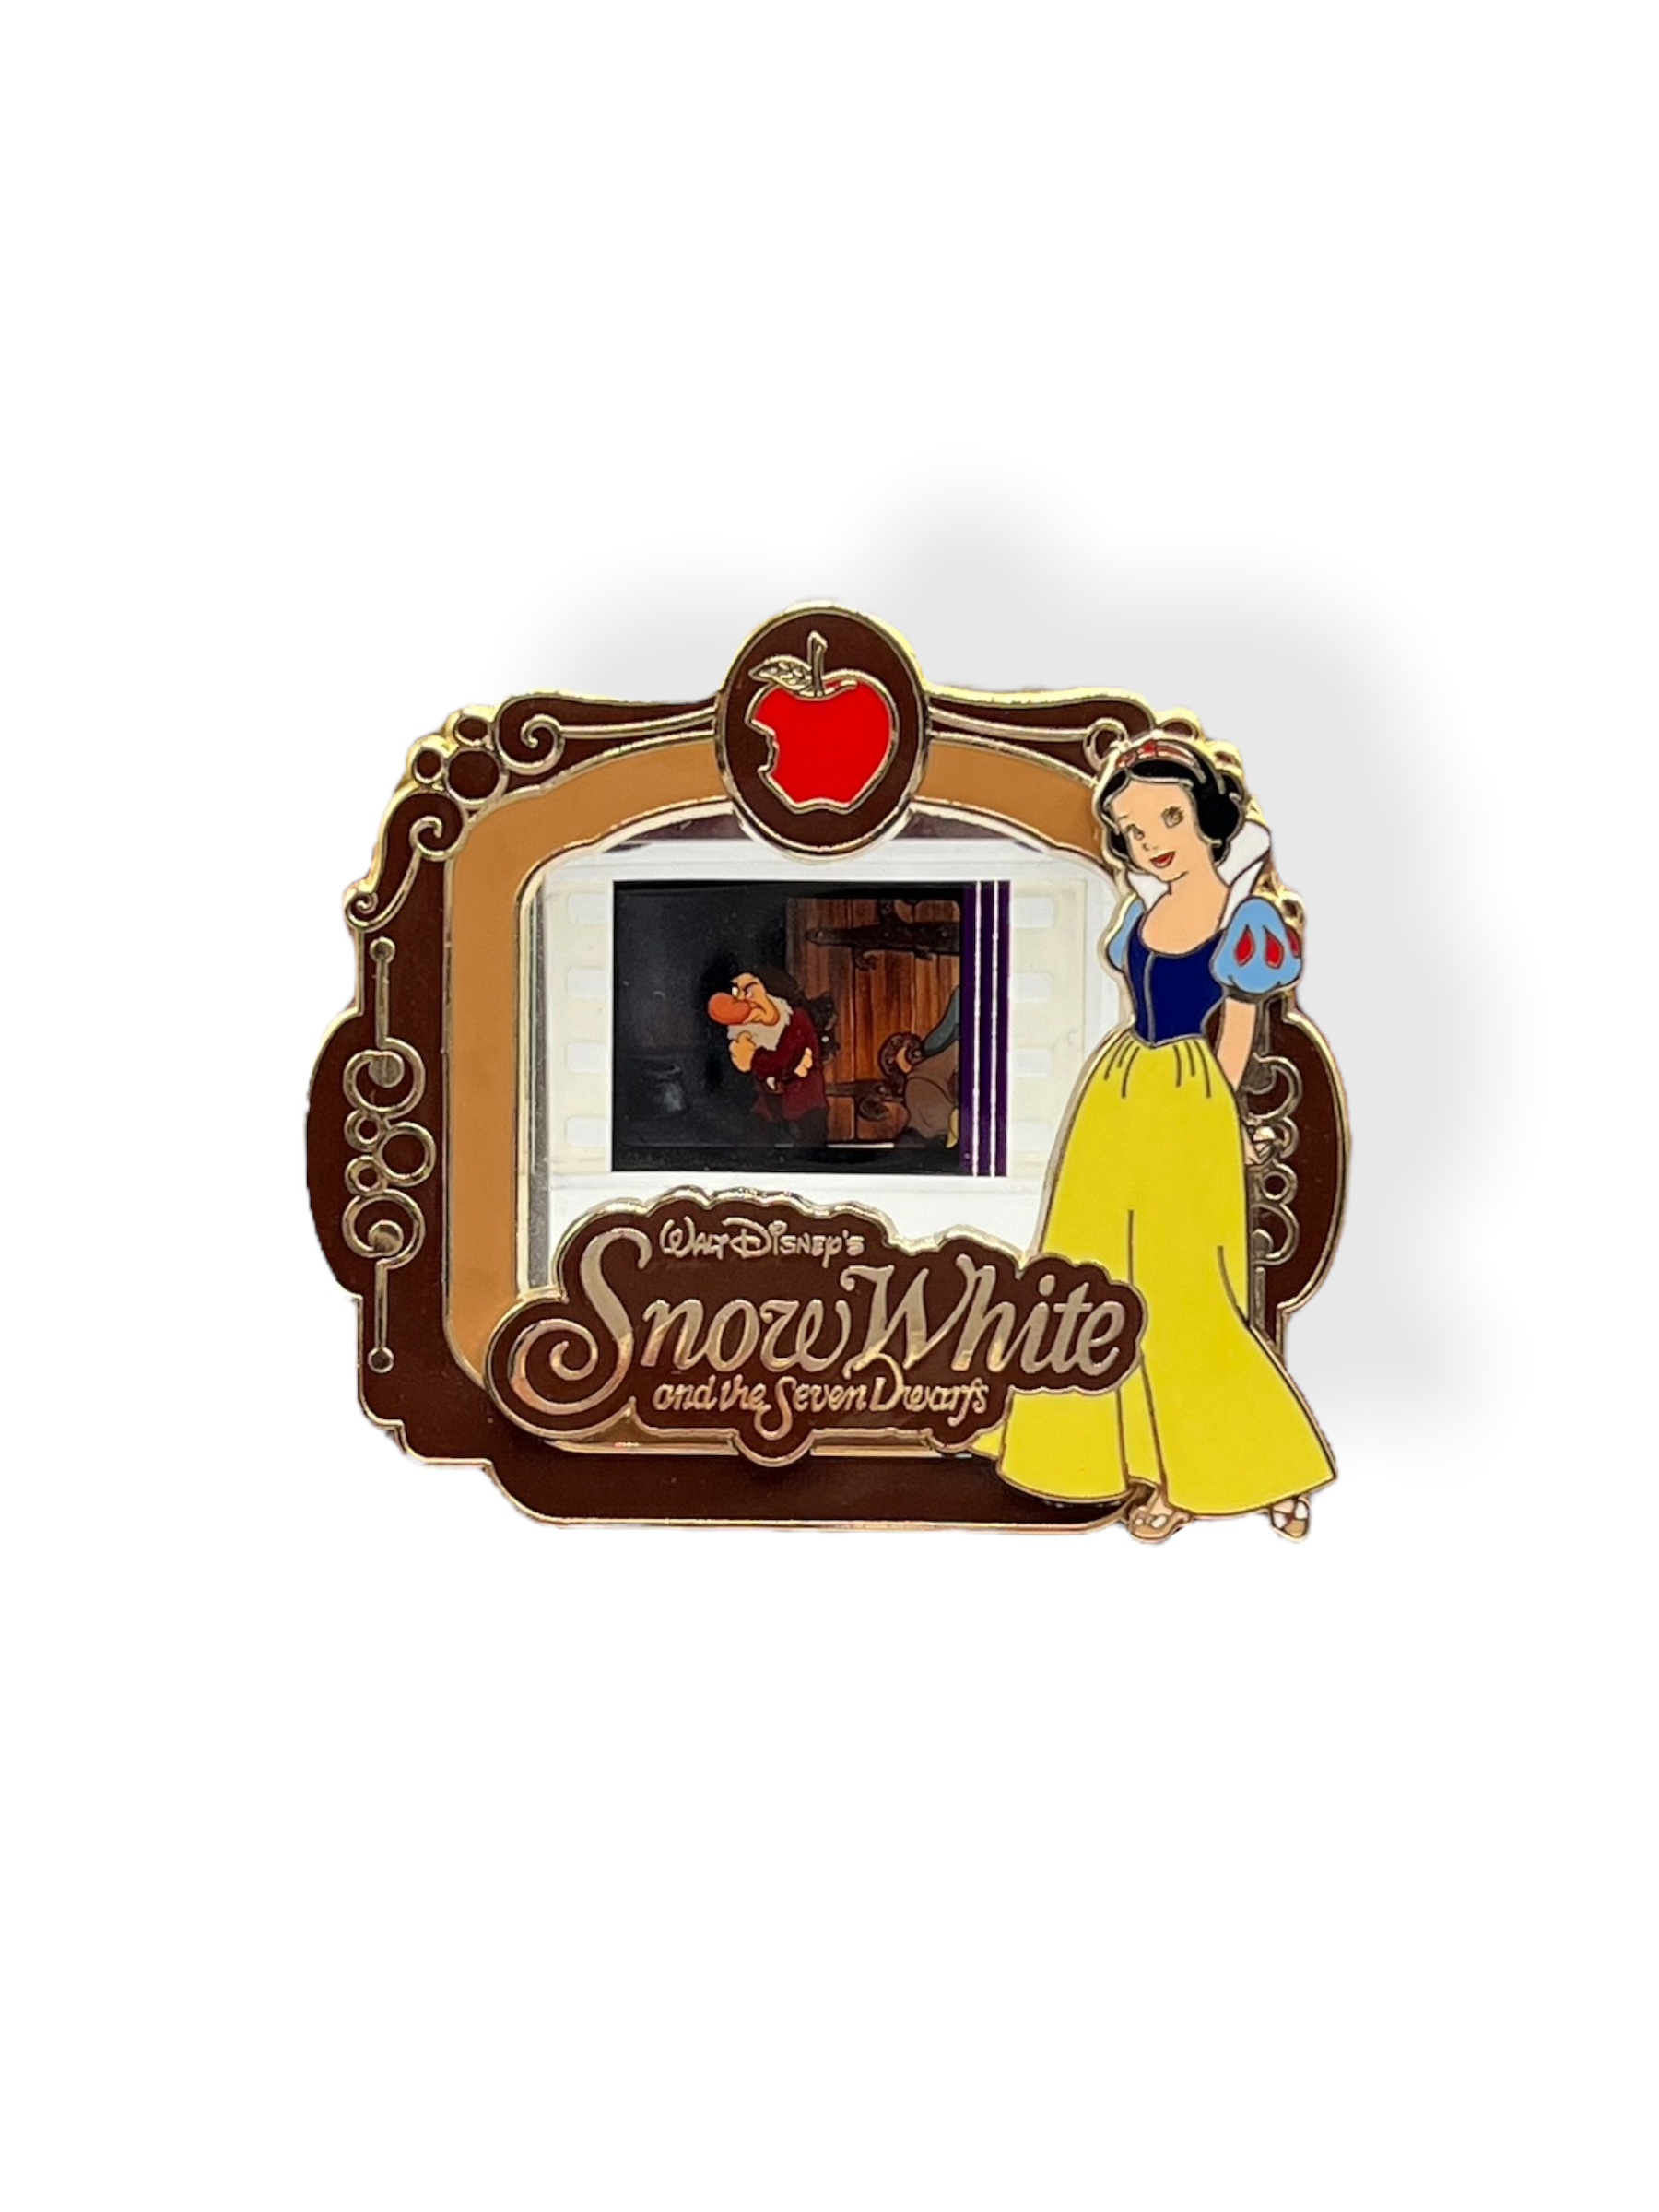 Piece of Disney Movies Snow White and The Seven Dwarfs Pin